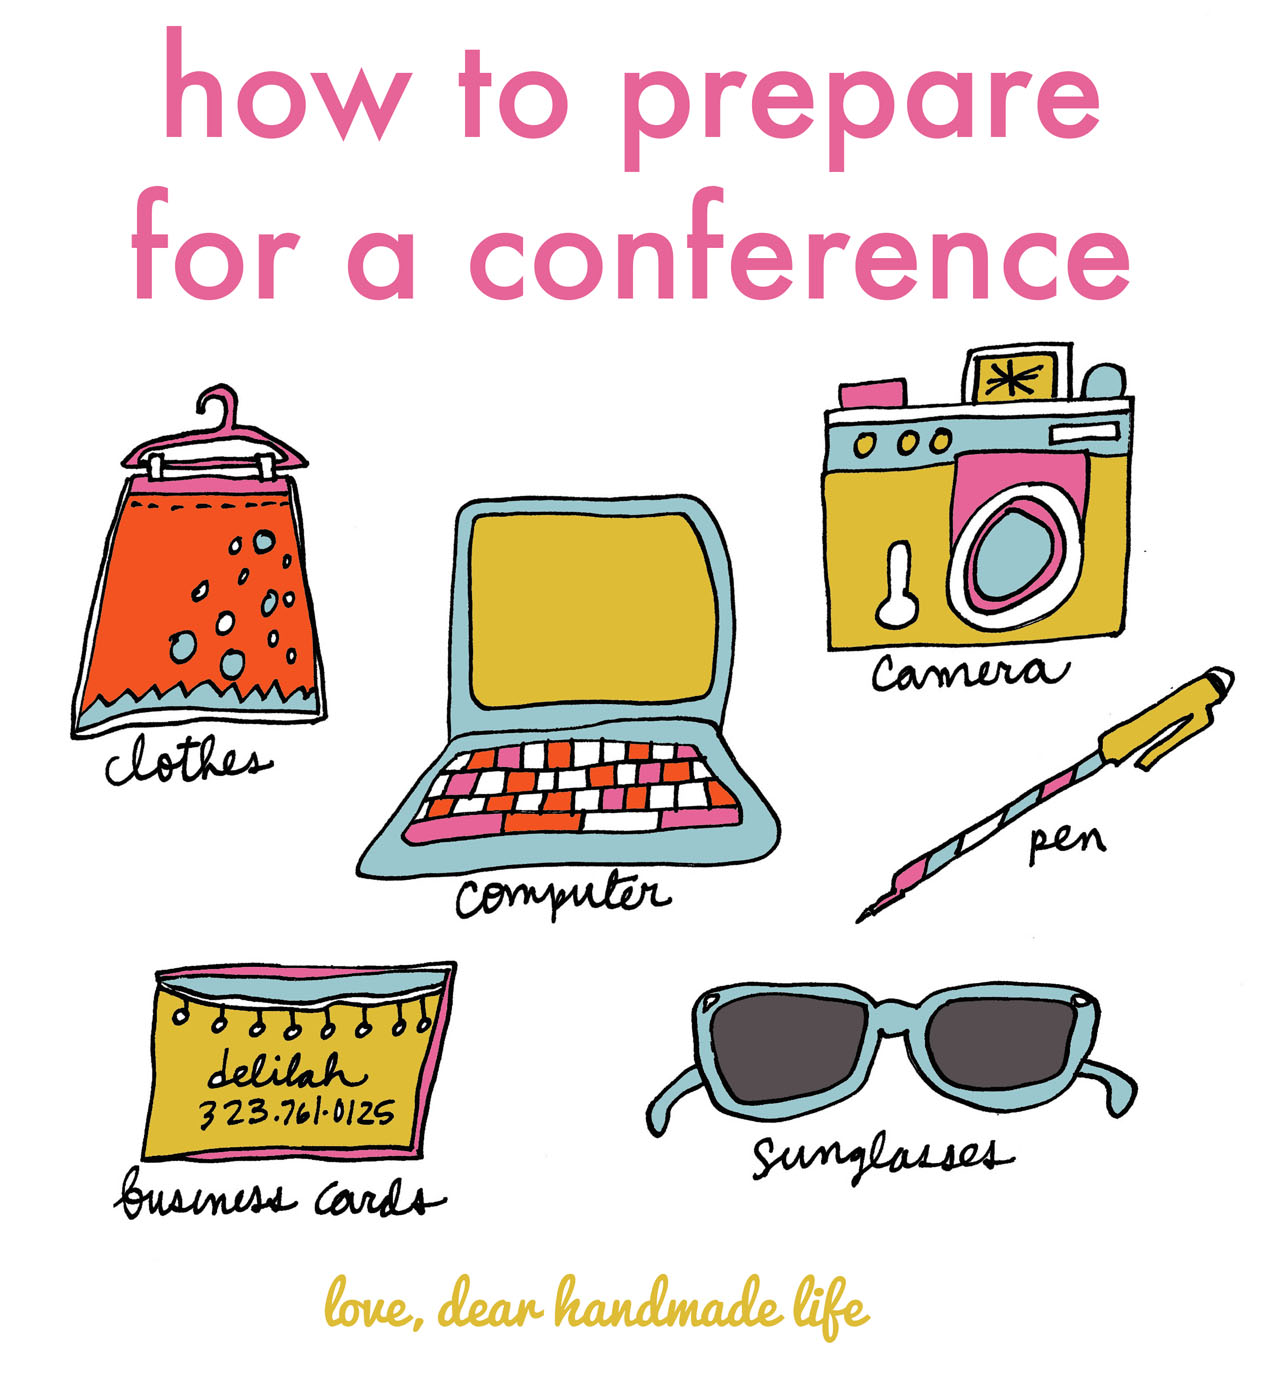 how-to-prepare-for-a-conference-dear-handmade-life